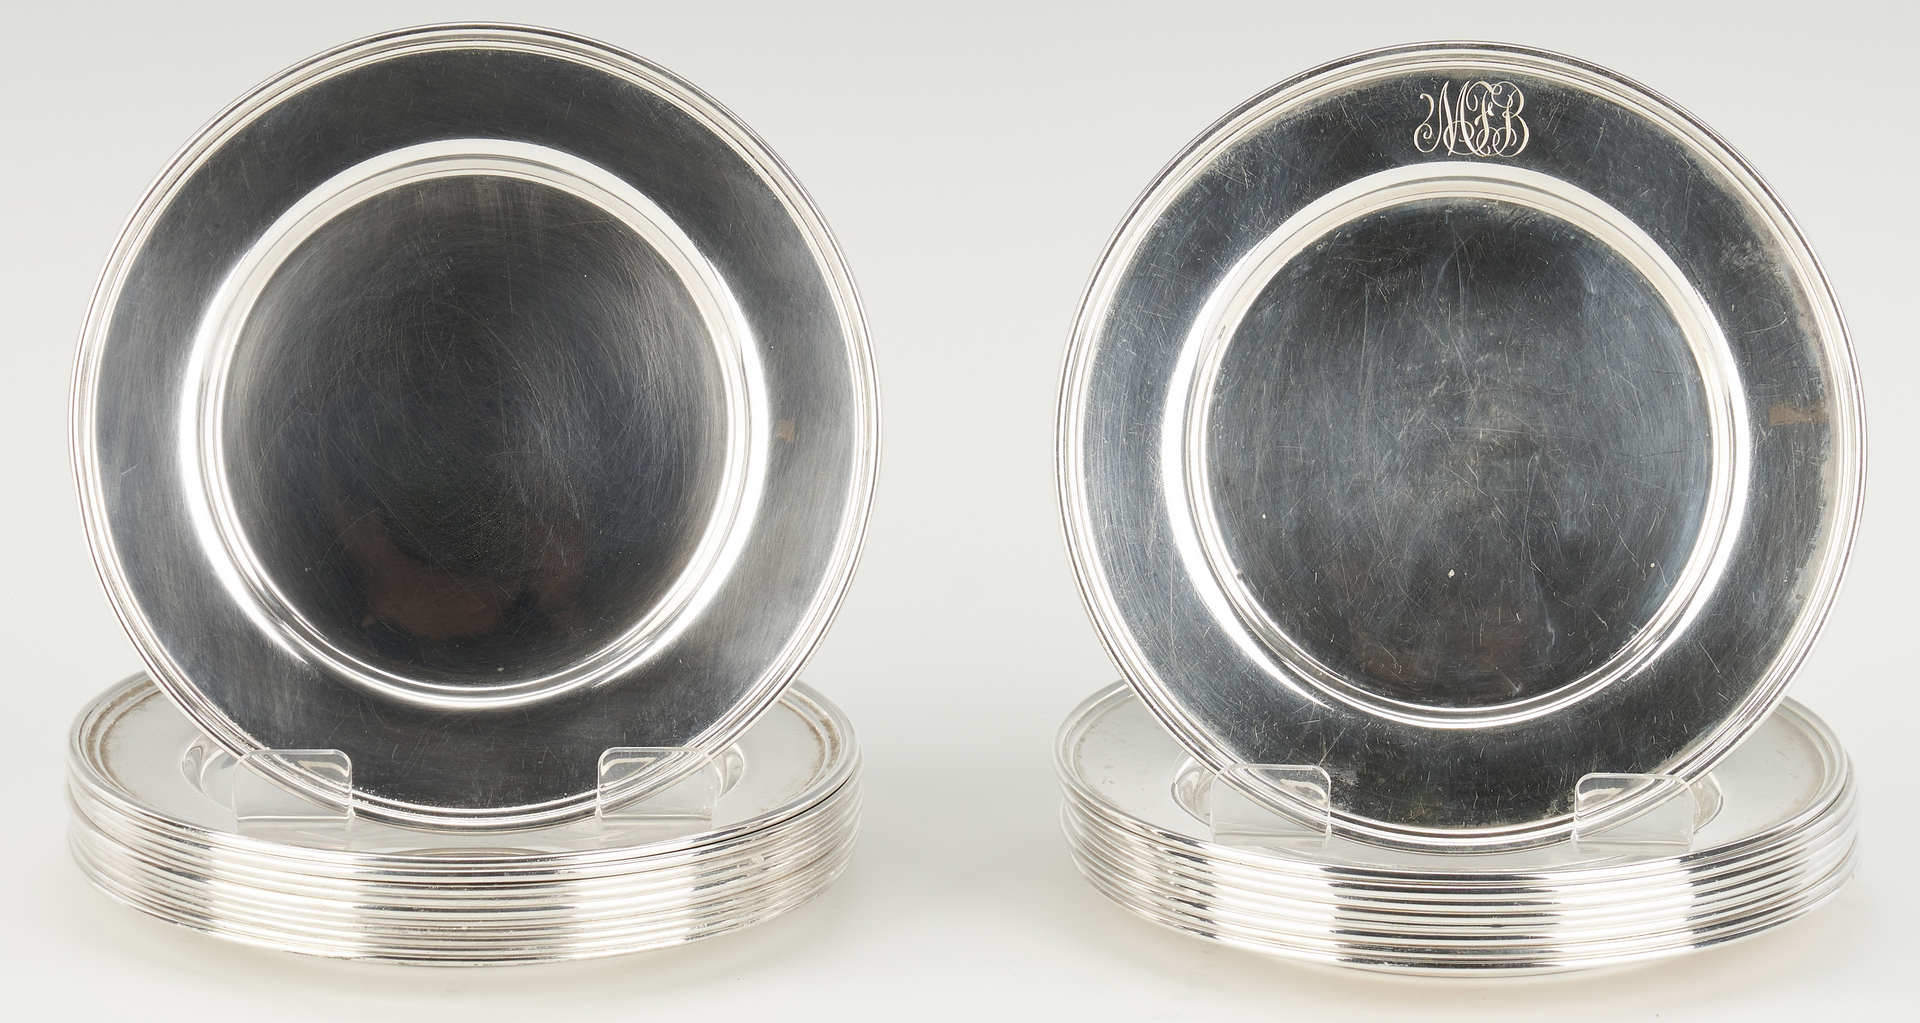 Lot 289: Group of 20 Sterling Silver Bread Plates